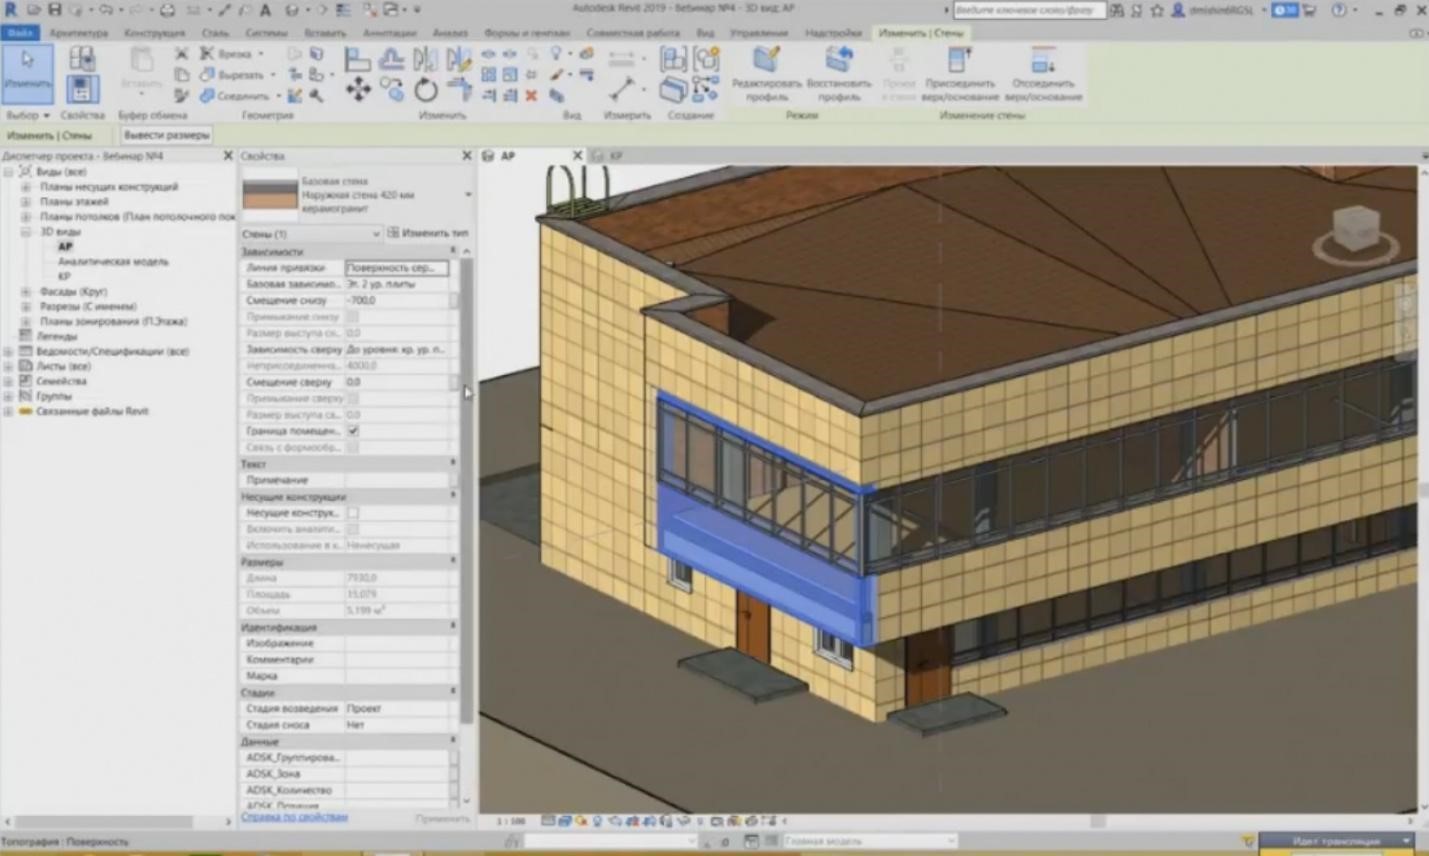 BIM DESIGN IN REVIT. CREATING ARCHITECTURAL AND STRUCTURAL ELEMENTS. PAGE 2-1